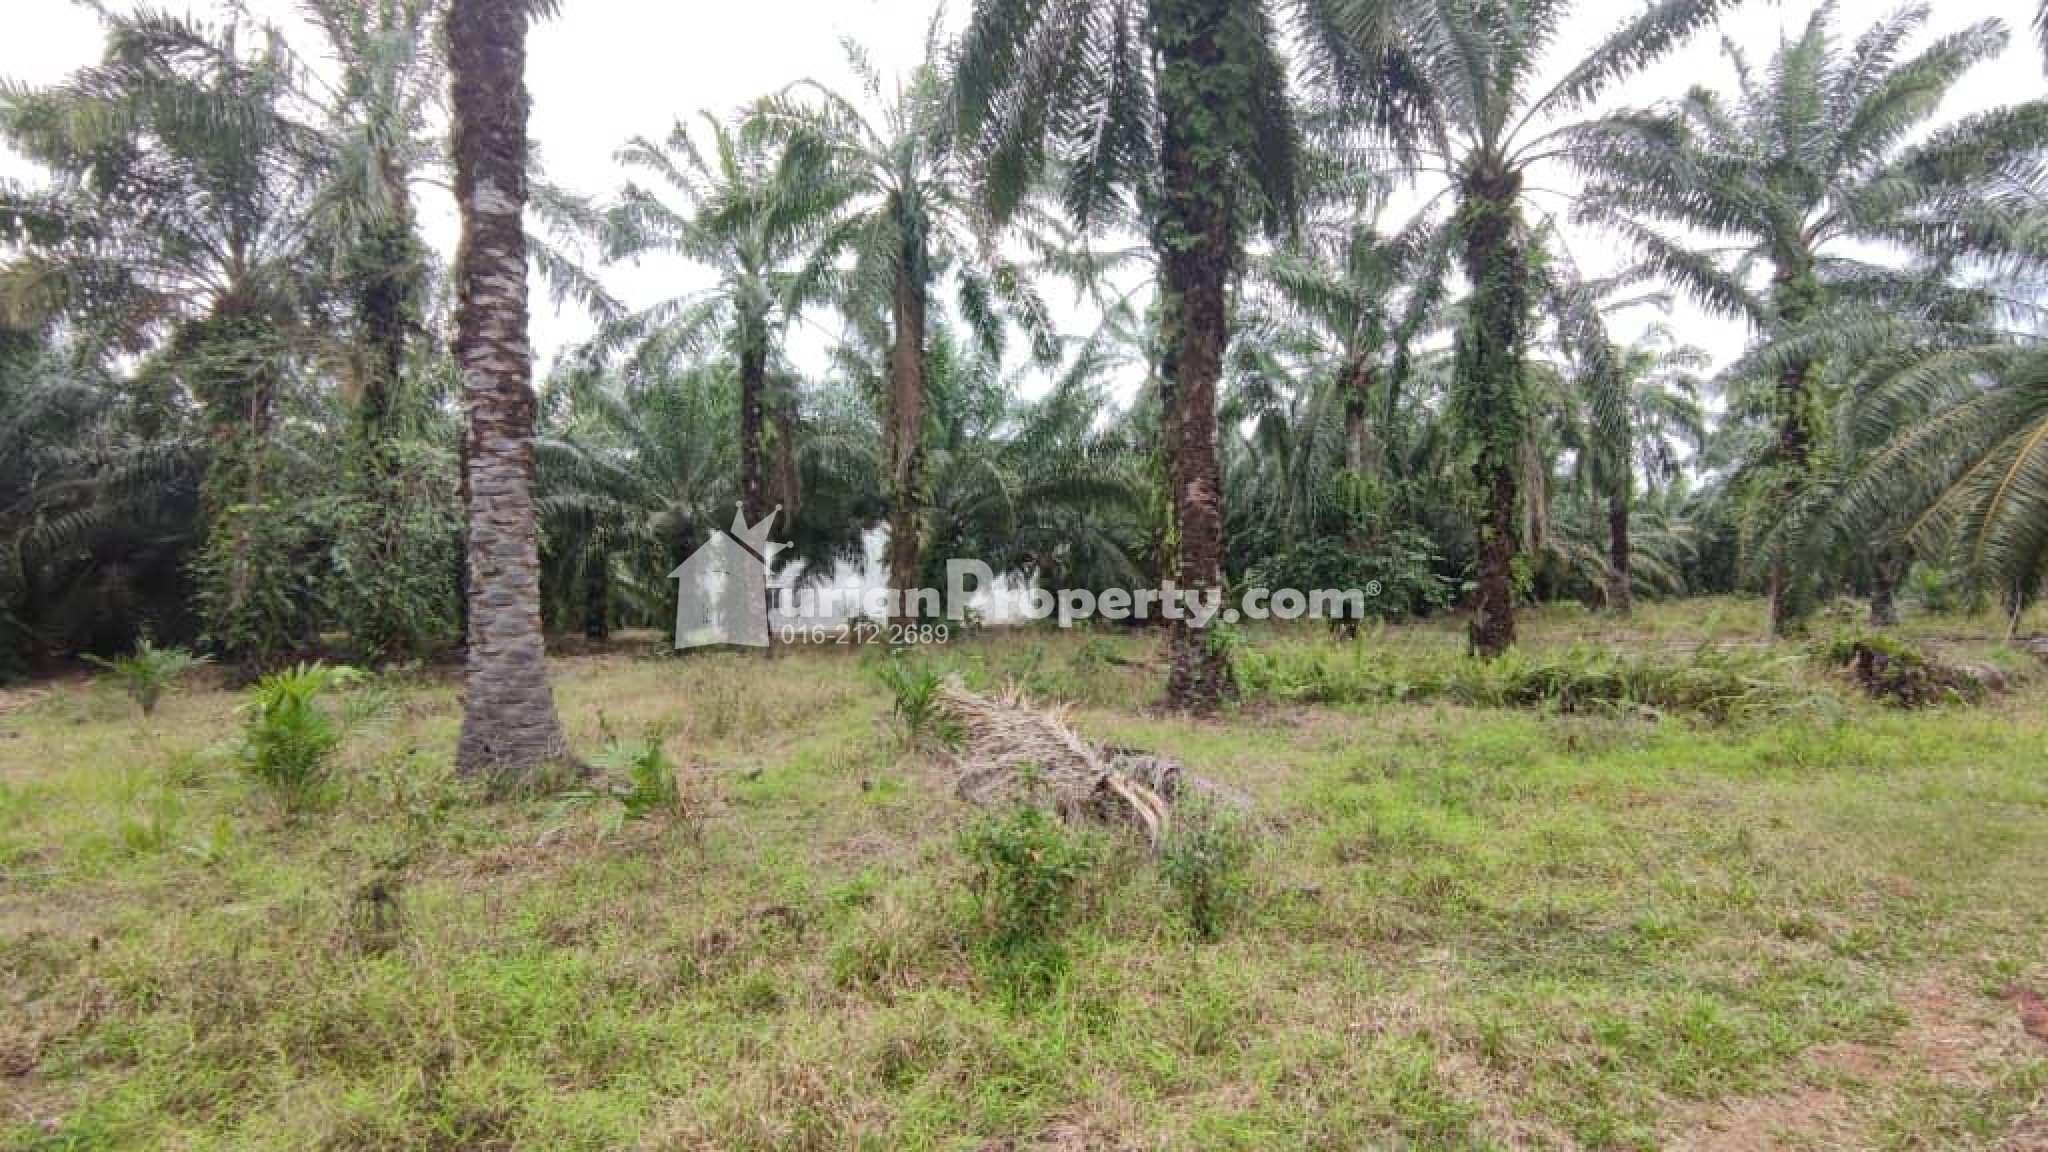 Agriculture Land For Sale at Semenyih